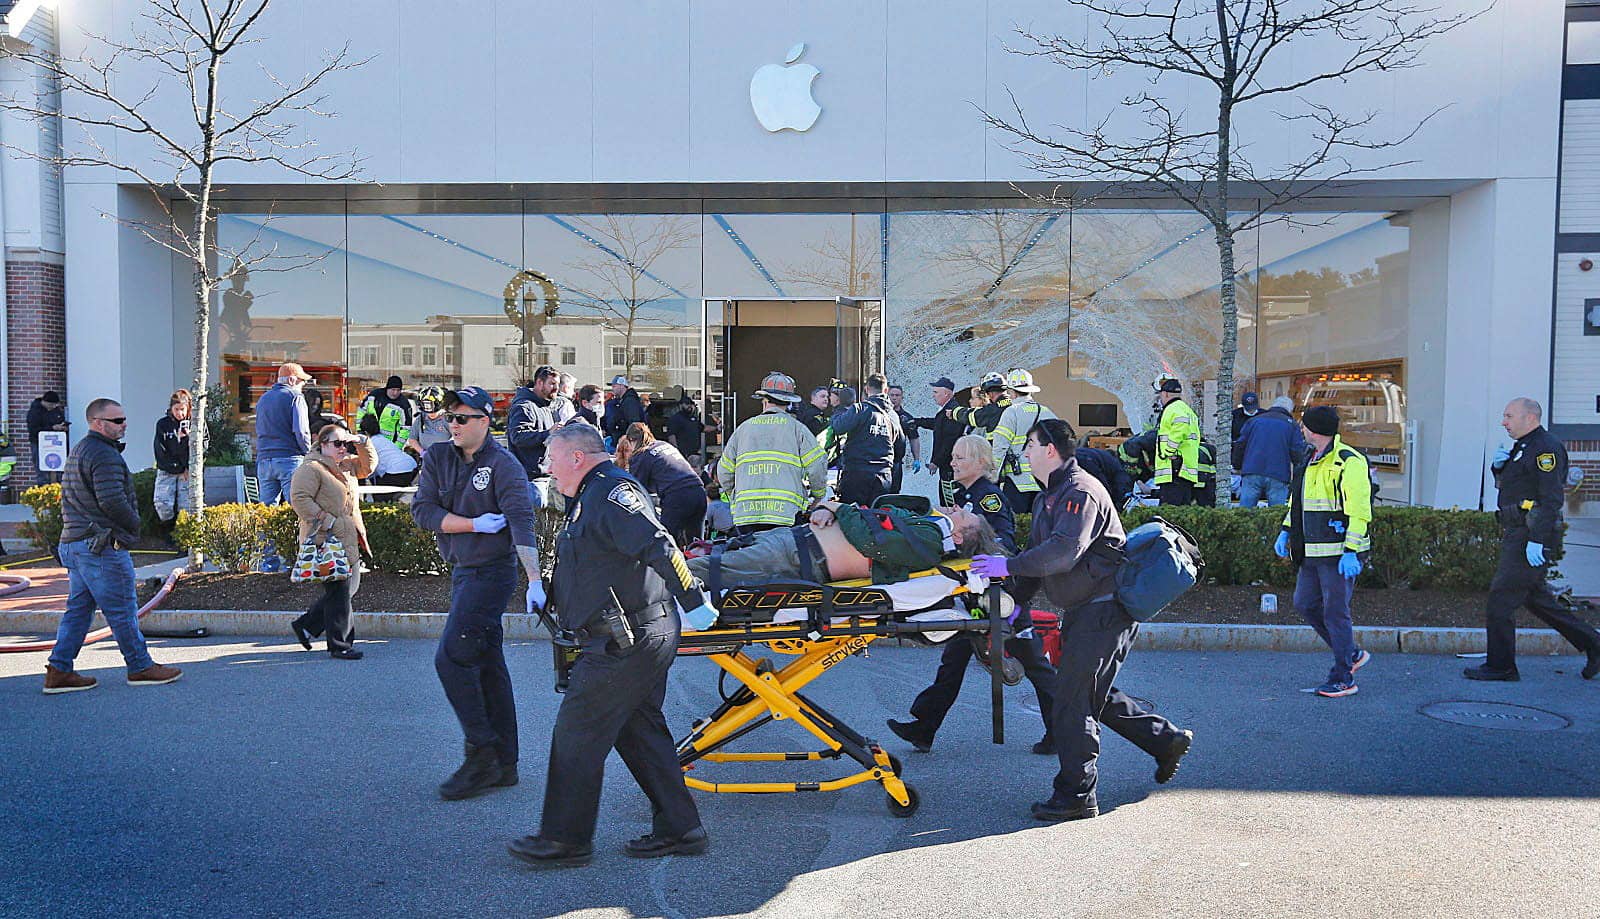 emergency-services-personnel-push-a-victim-to-a-waiting-ambulance-after-a-vehicle-crashed-into-an-apple-store